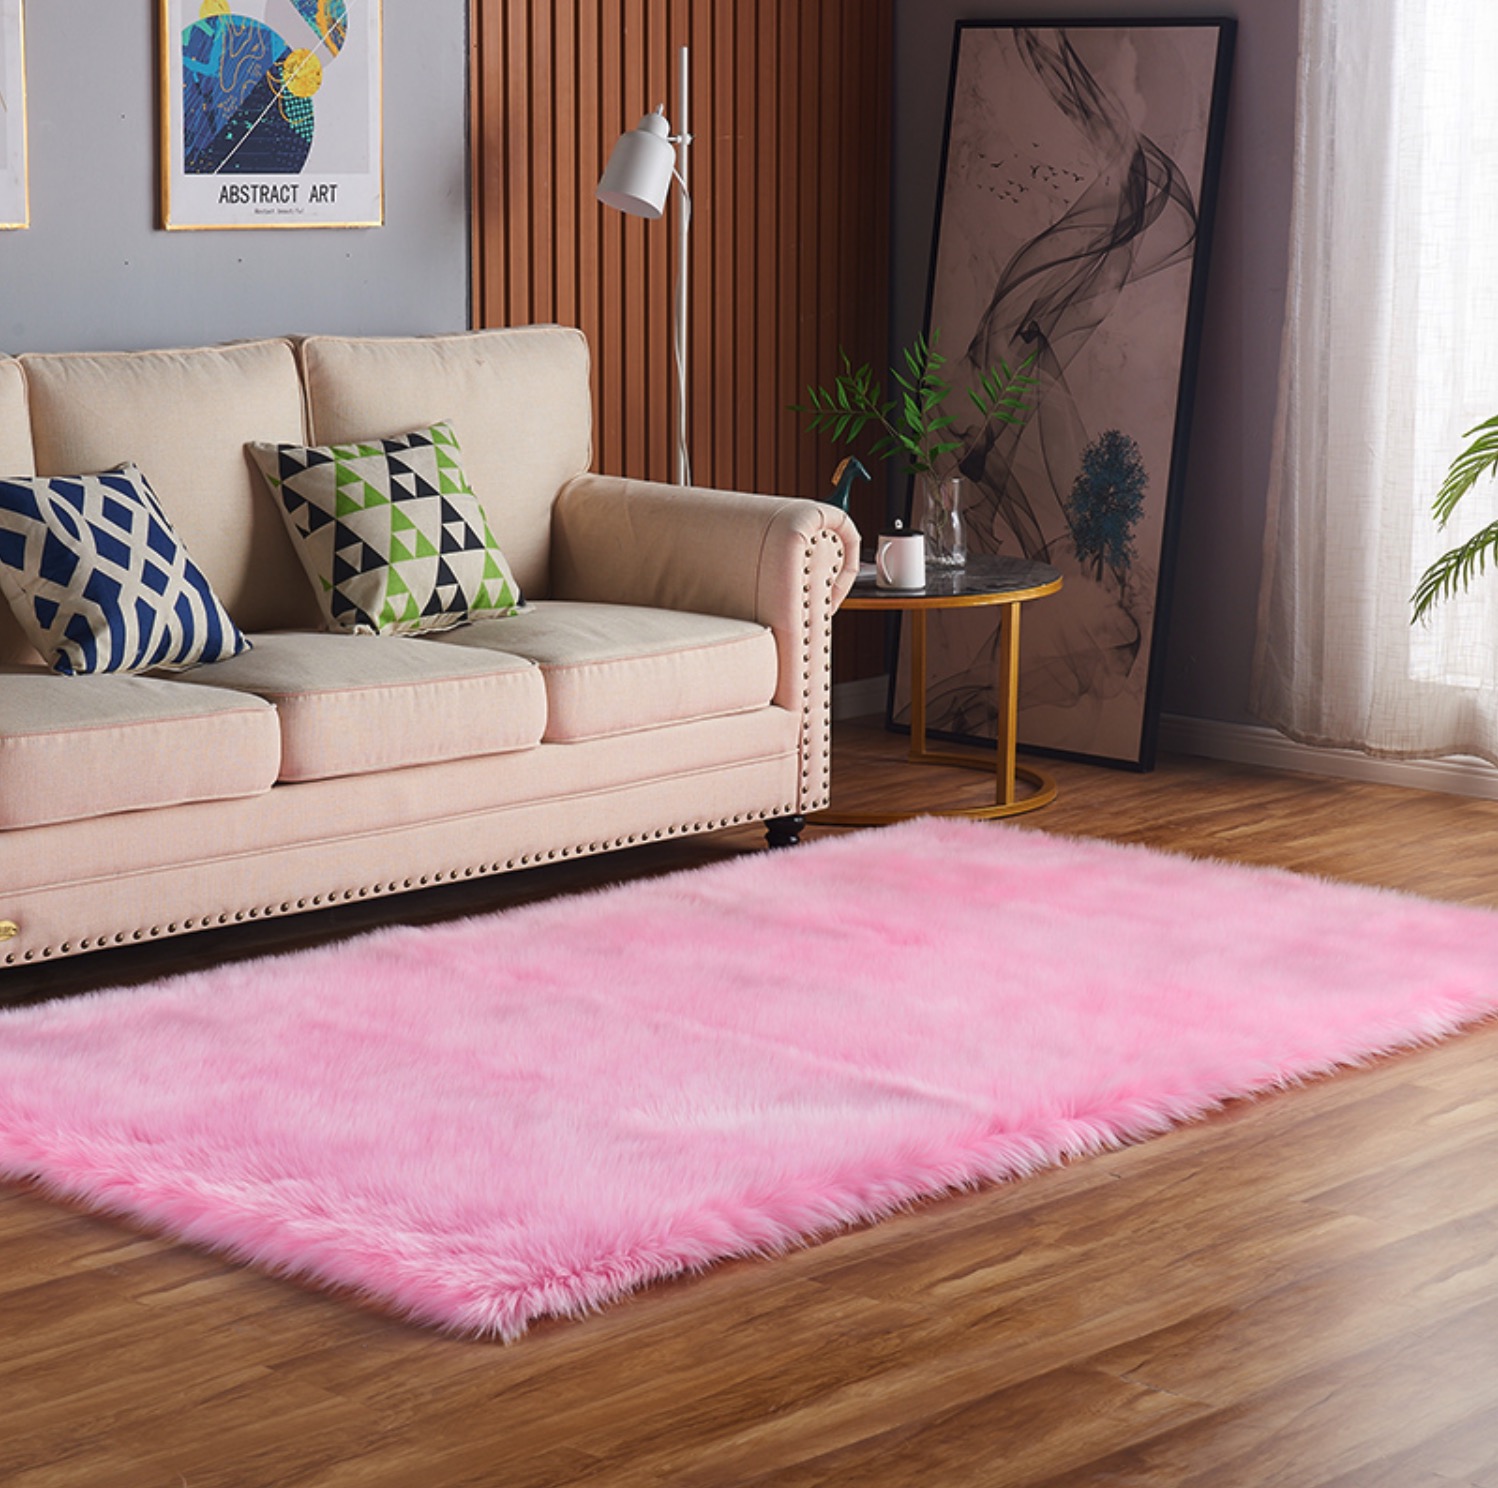 The best furniture photography is in China. The pink blanket is on the floor